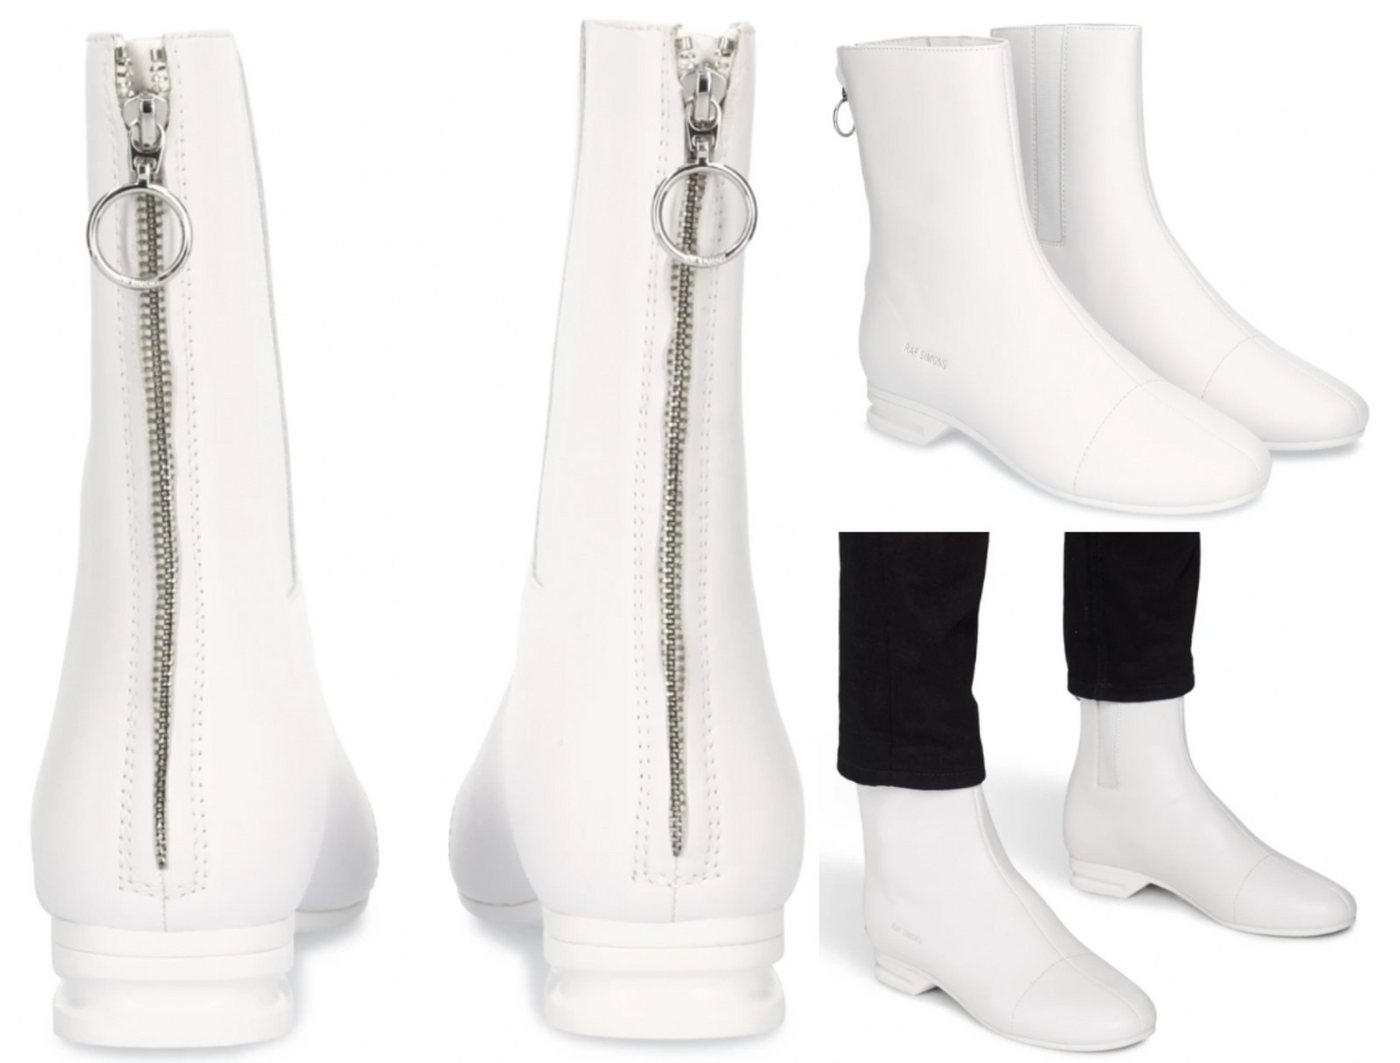 Raf Simons RAF SIMONS Stiefel 2001-2 HIGH White Zip-Up Ankle Boots Stiefel Schuhe Sneaker von Raf Simons